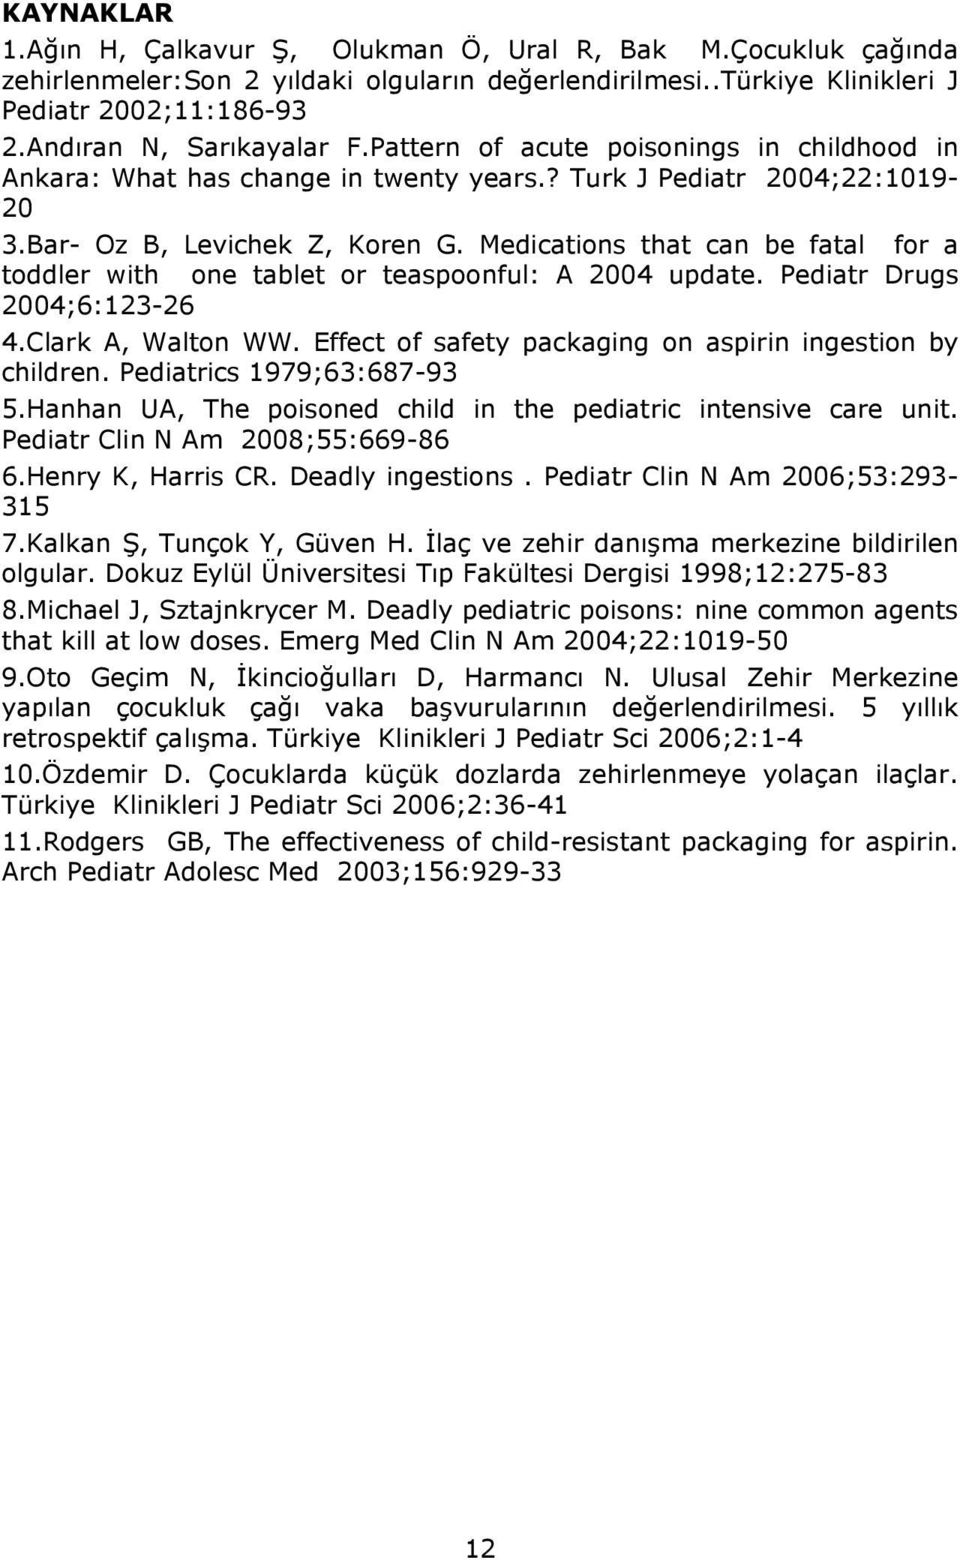 Medications that can be fatal for a toddler with one tablet or teaspoonful: A 2004 update. Pediatr Drugs 2004;6:123-26 4.Clark A, Walton WW.